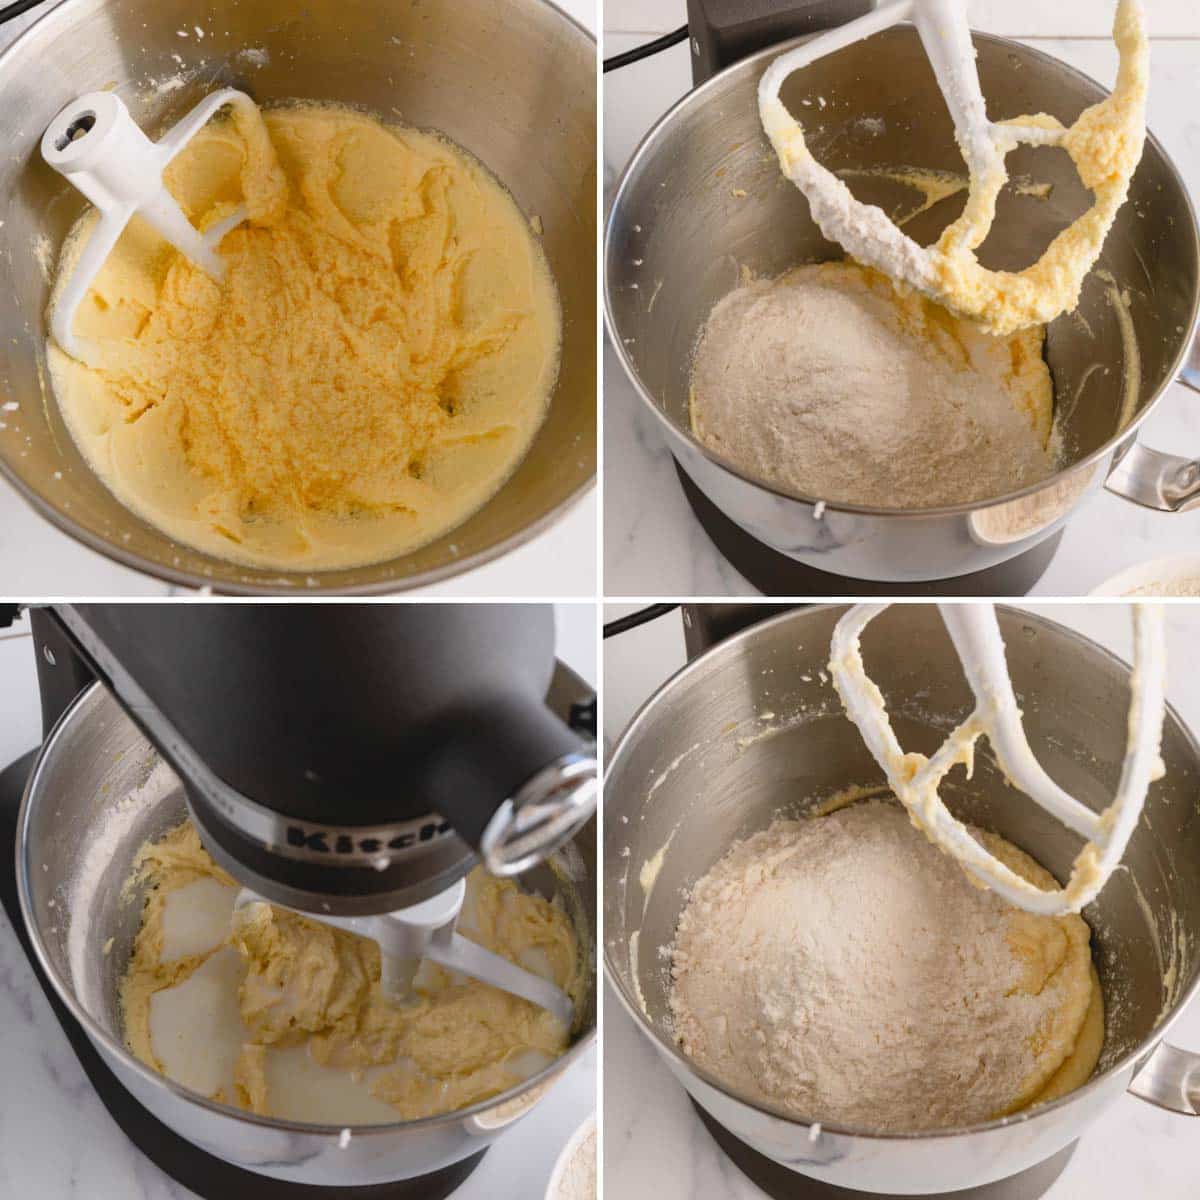 Four images showing the process of combining wet and dry ingredients for lemon sheet cake.